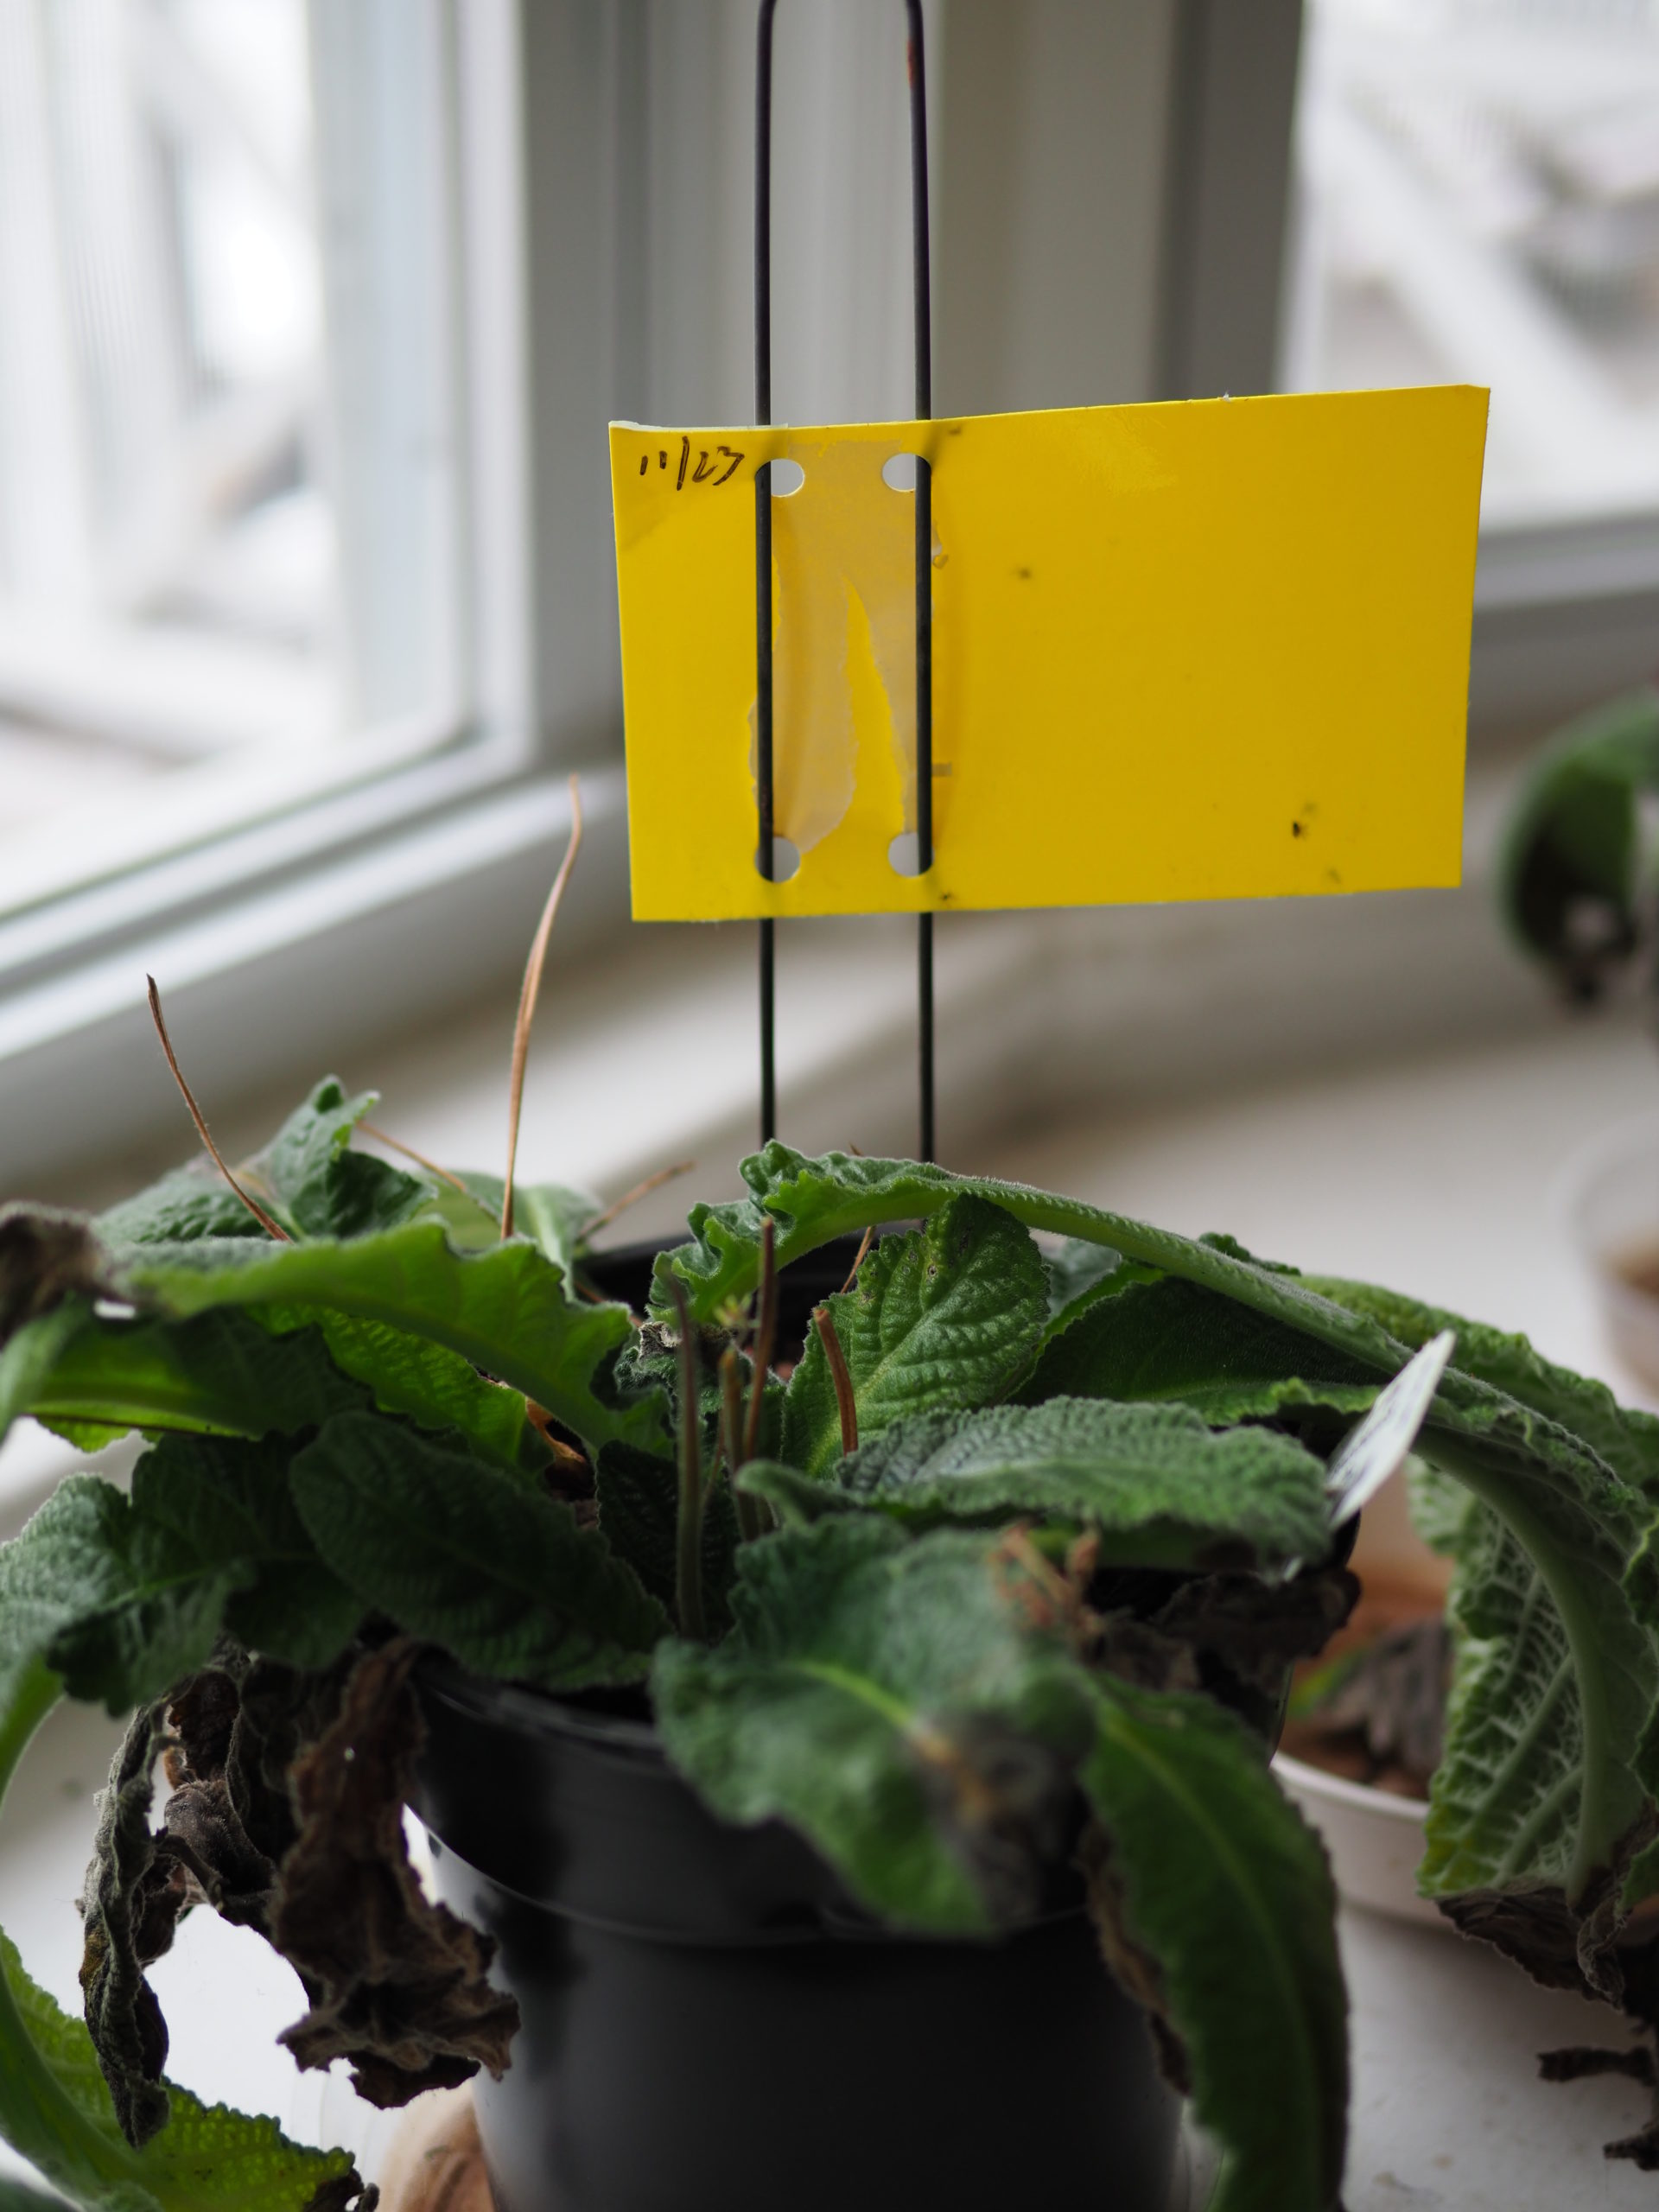 Yellow sticky cards mounted on a wire stake are set just inches above the foliage and soil to trap fungus gnats. The 3-by-5-inch cards are used to monitor and manage the gnats. A permanent marker can be used to make a circle around each gnat so new catches are only counted once.